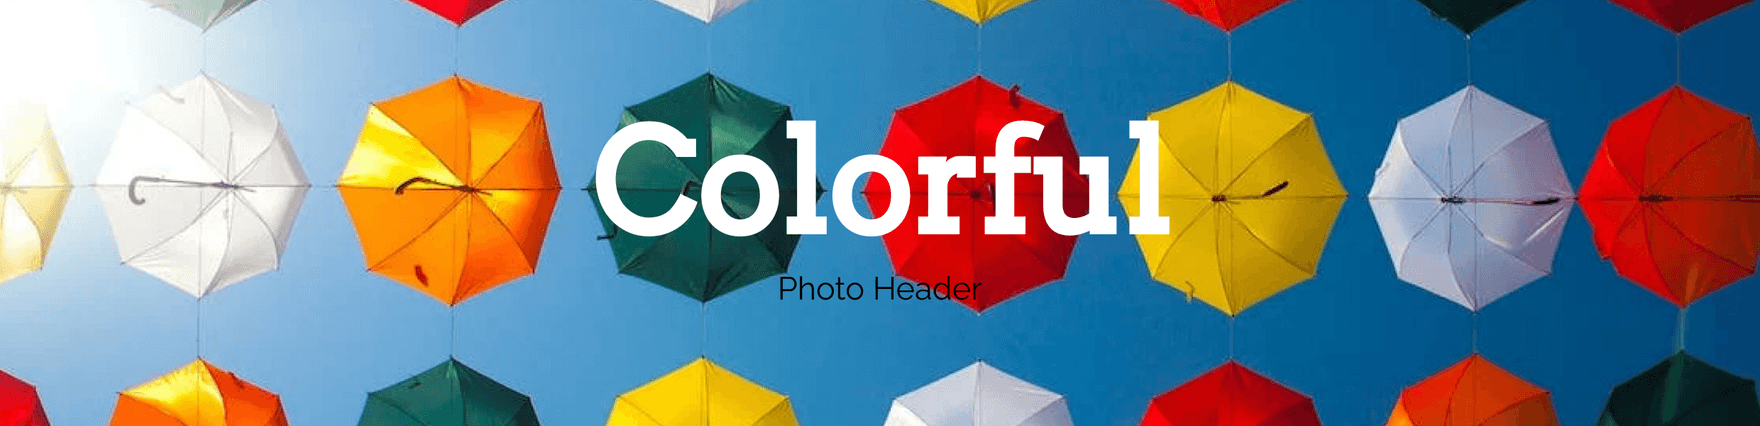 Free Colorful Photo Header Template